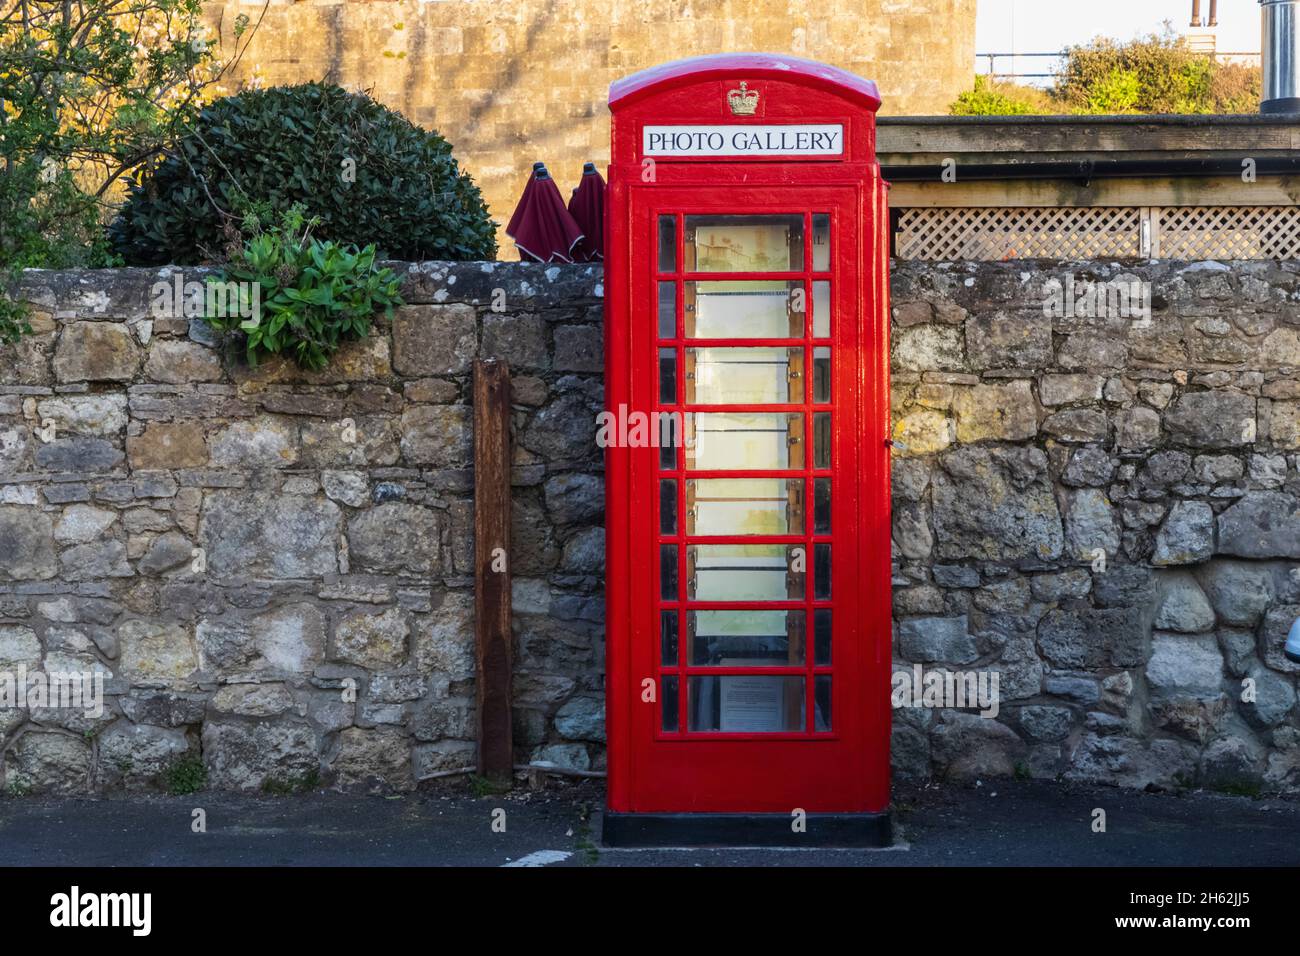 england, Insel wight, yarmouth, traditionelle rote Telefonbox in Mini-Fotogalerie umgewandelt Stockfoto